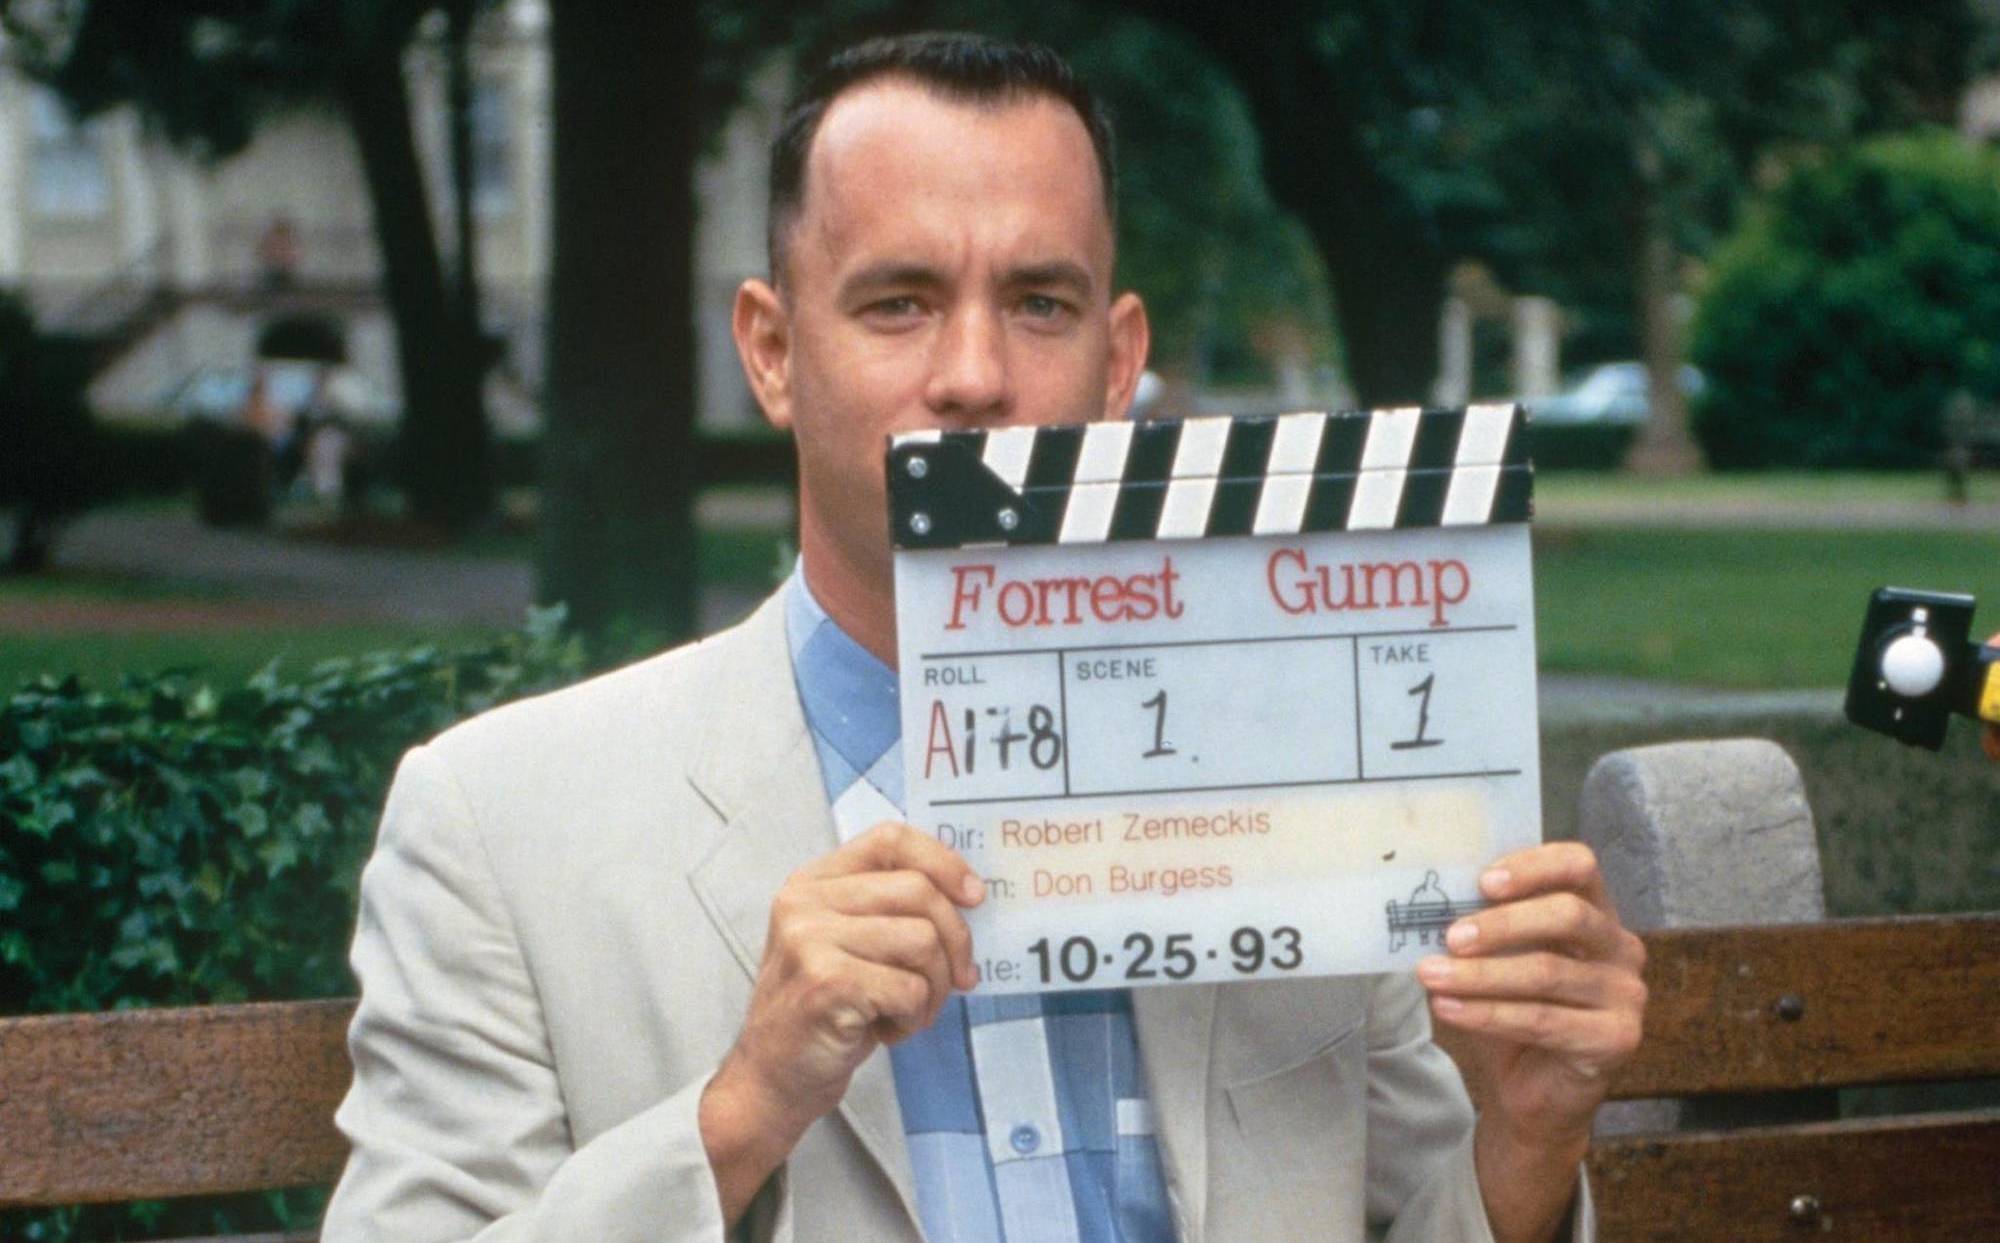 <p><em>Forrest Gump</em>. Just saying that film's title will create polarized conversation on the internet. At the time, it was beloved. Tom Hanks made Oscar history with his Best Actor win. It took home Best Picture in 1994. Of course, time is not kind to all films, even Oscar winners. There’s an interesting story to the Robert Zemeckis movie. Whether you like the film, these 20 facts about <em>Forrest Gump</em> might be intriguing and, if nothing else, provide fodder for your next debate.</p>